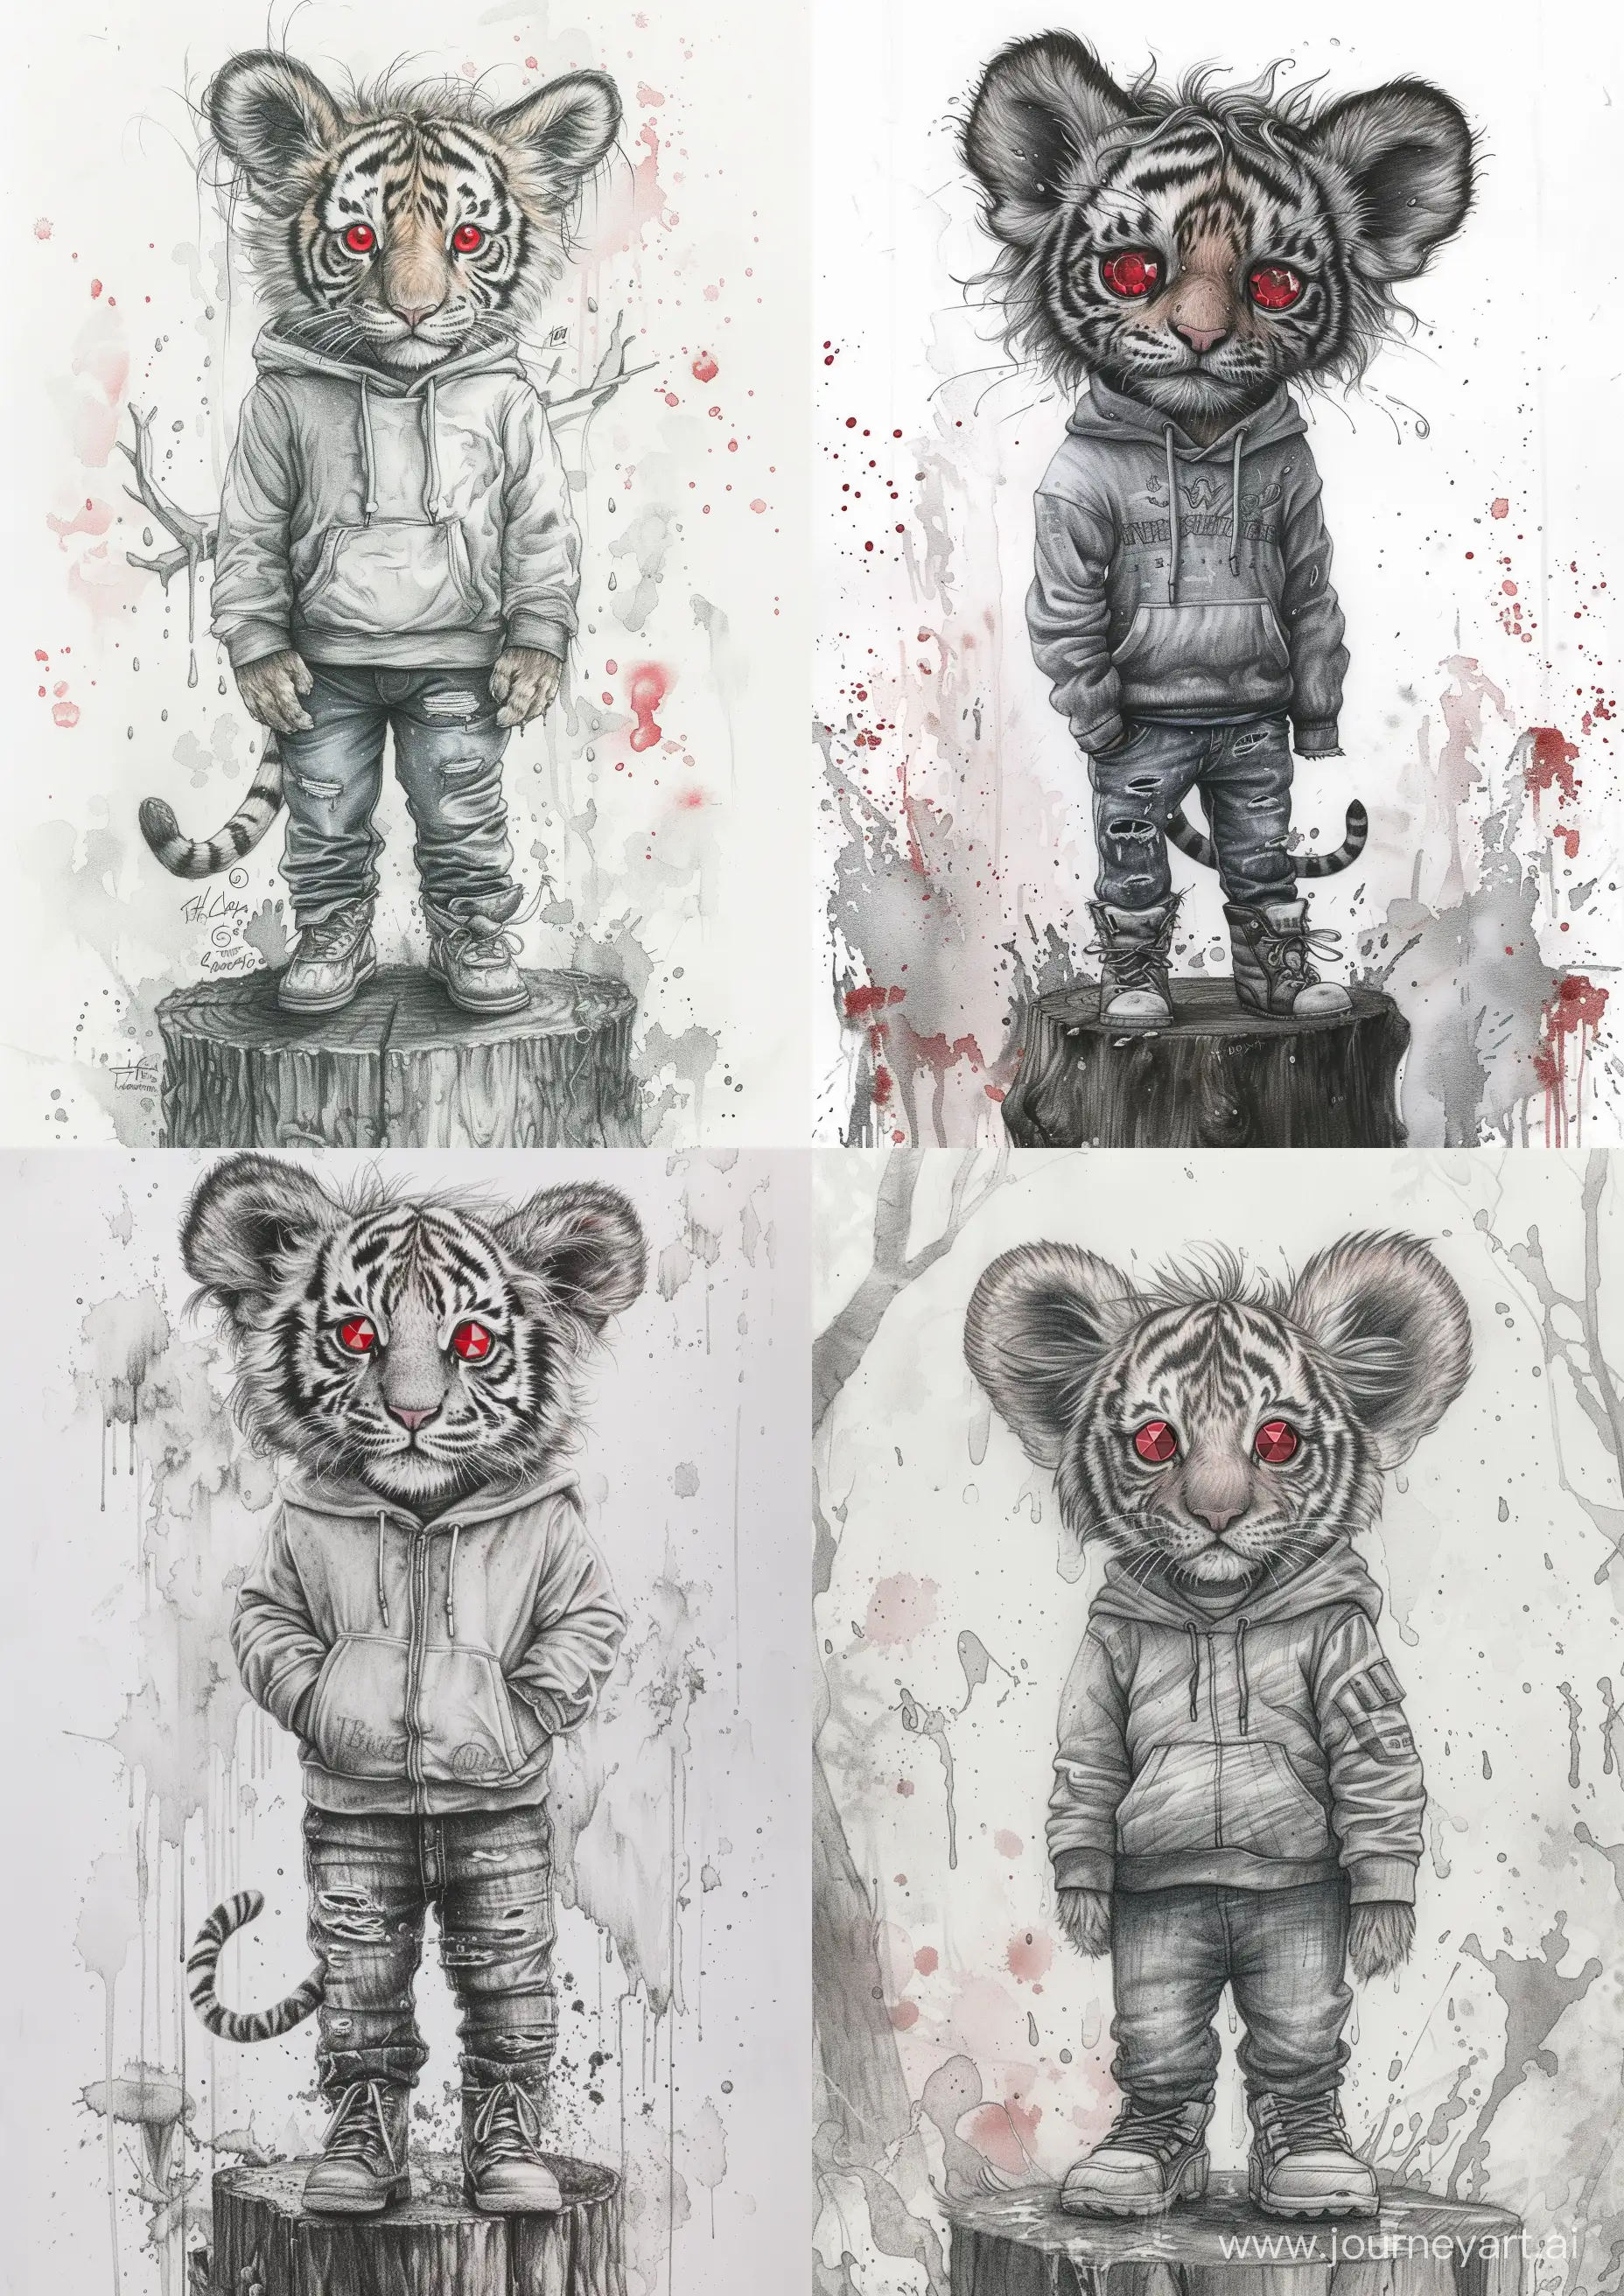 Cute-Shaggy-Tiger-Cub-in-Velvet-Hoodies-and-Jeans